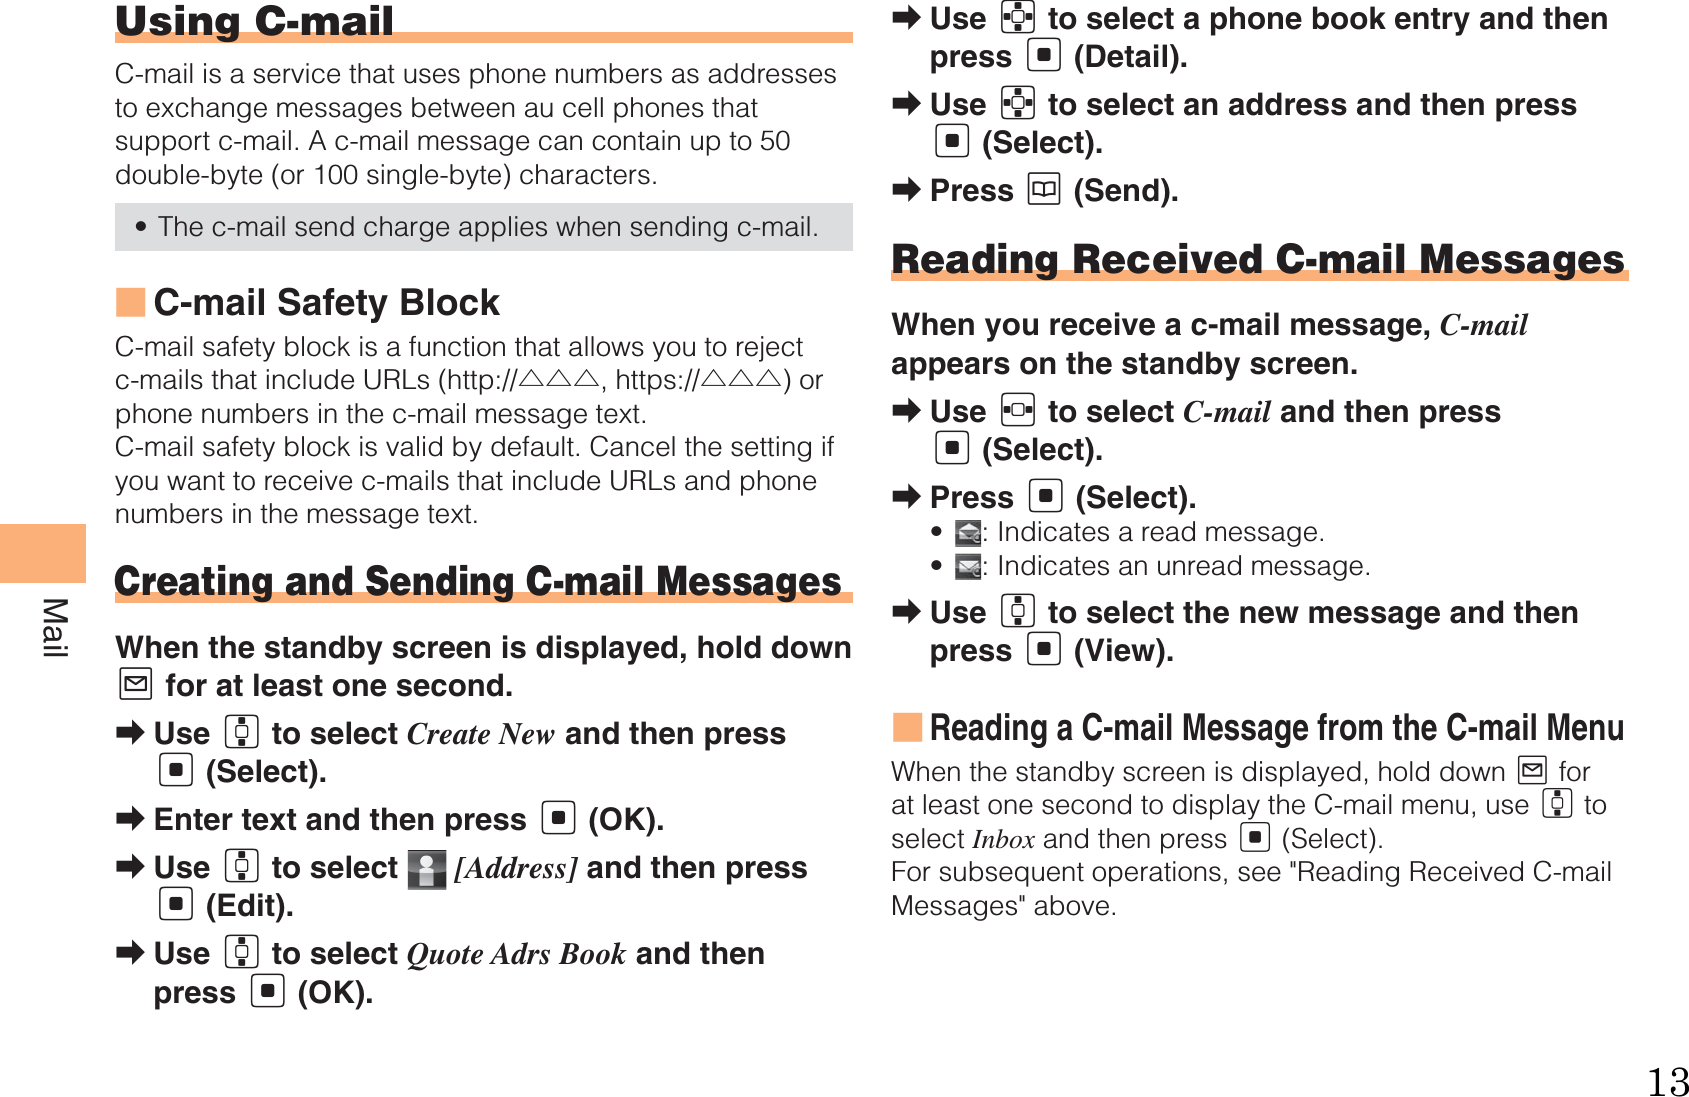 30MailUsing C-mailC-mail is a service that uses phone numbers as addresses to exchange messages between au cell phones that support c-mail. A c-mail message can contain up to 50 double-byte (or 100 single-byte) characters.The c-mail send charge applies when sending c-mail.C-mail Safety BlockC-mail safety block is a function that allows you to reject c-mails that include URLs (http://△△△, https://△△△) or phone numbers in the c-mail message text.C-mail safety block is valid by default. Cancel the setting if you want to receive c-mails that include URLs and phone numbers in the message text.Creating and Sending C-mail MessagesWhen the standby screen is displayed, hold down L for at least one second.Use G to select Create New and then press [ (Select).Enter text and then press [ (OK).Use G to select   [Address] and then press [ (Edit).Use G to select Quote Adrs Book and then press [ (OK).•■➡➡➡➡Use E to select a phone book entry and then press [ (Detail).Use E to select an address and then press [ (Select).Press K (Send).Reading Received C-mail MessagesWhen you receive a c-mail message, C-mail appears on the standby screen.Use F to select C-mail and then press [ (Select).Press [ (Select).  : Indicates a read message. : Indicates an unread message.Use G to select the new message and then press [ (View).Reading a C-mail Message from the C-mail MenuWhen the standby screen is displayed, hold down L for at least one second to display the C-mail menu, use G to select Inbox and then press [ (Select). For subsequent operations, see &quot;Reading Received C-mail Messages&quot; above.➡➡➡➡➡••➡■13